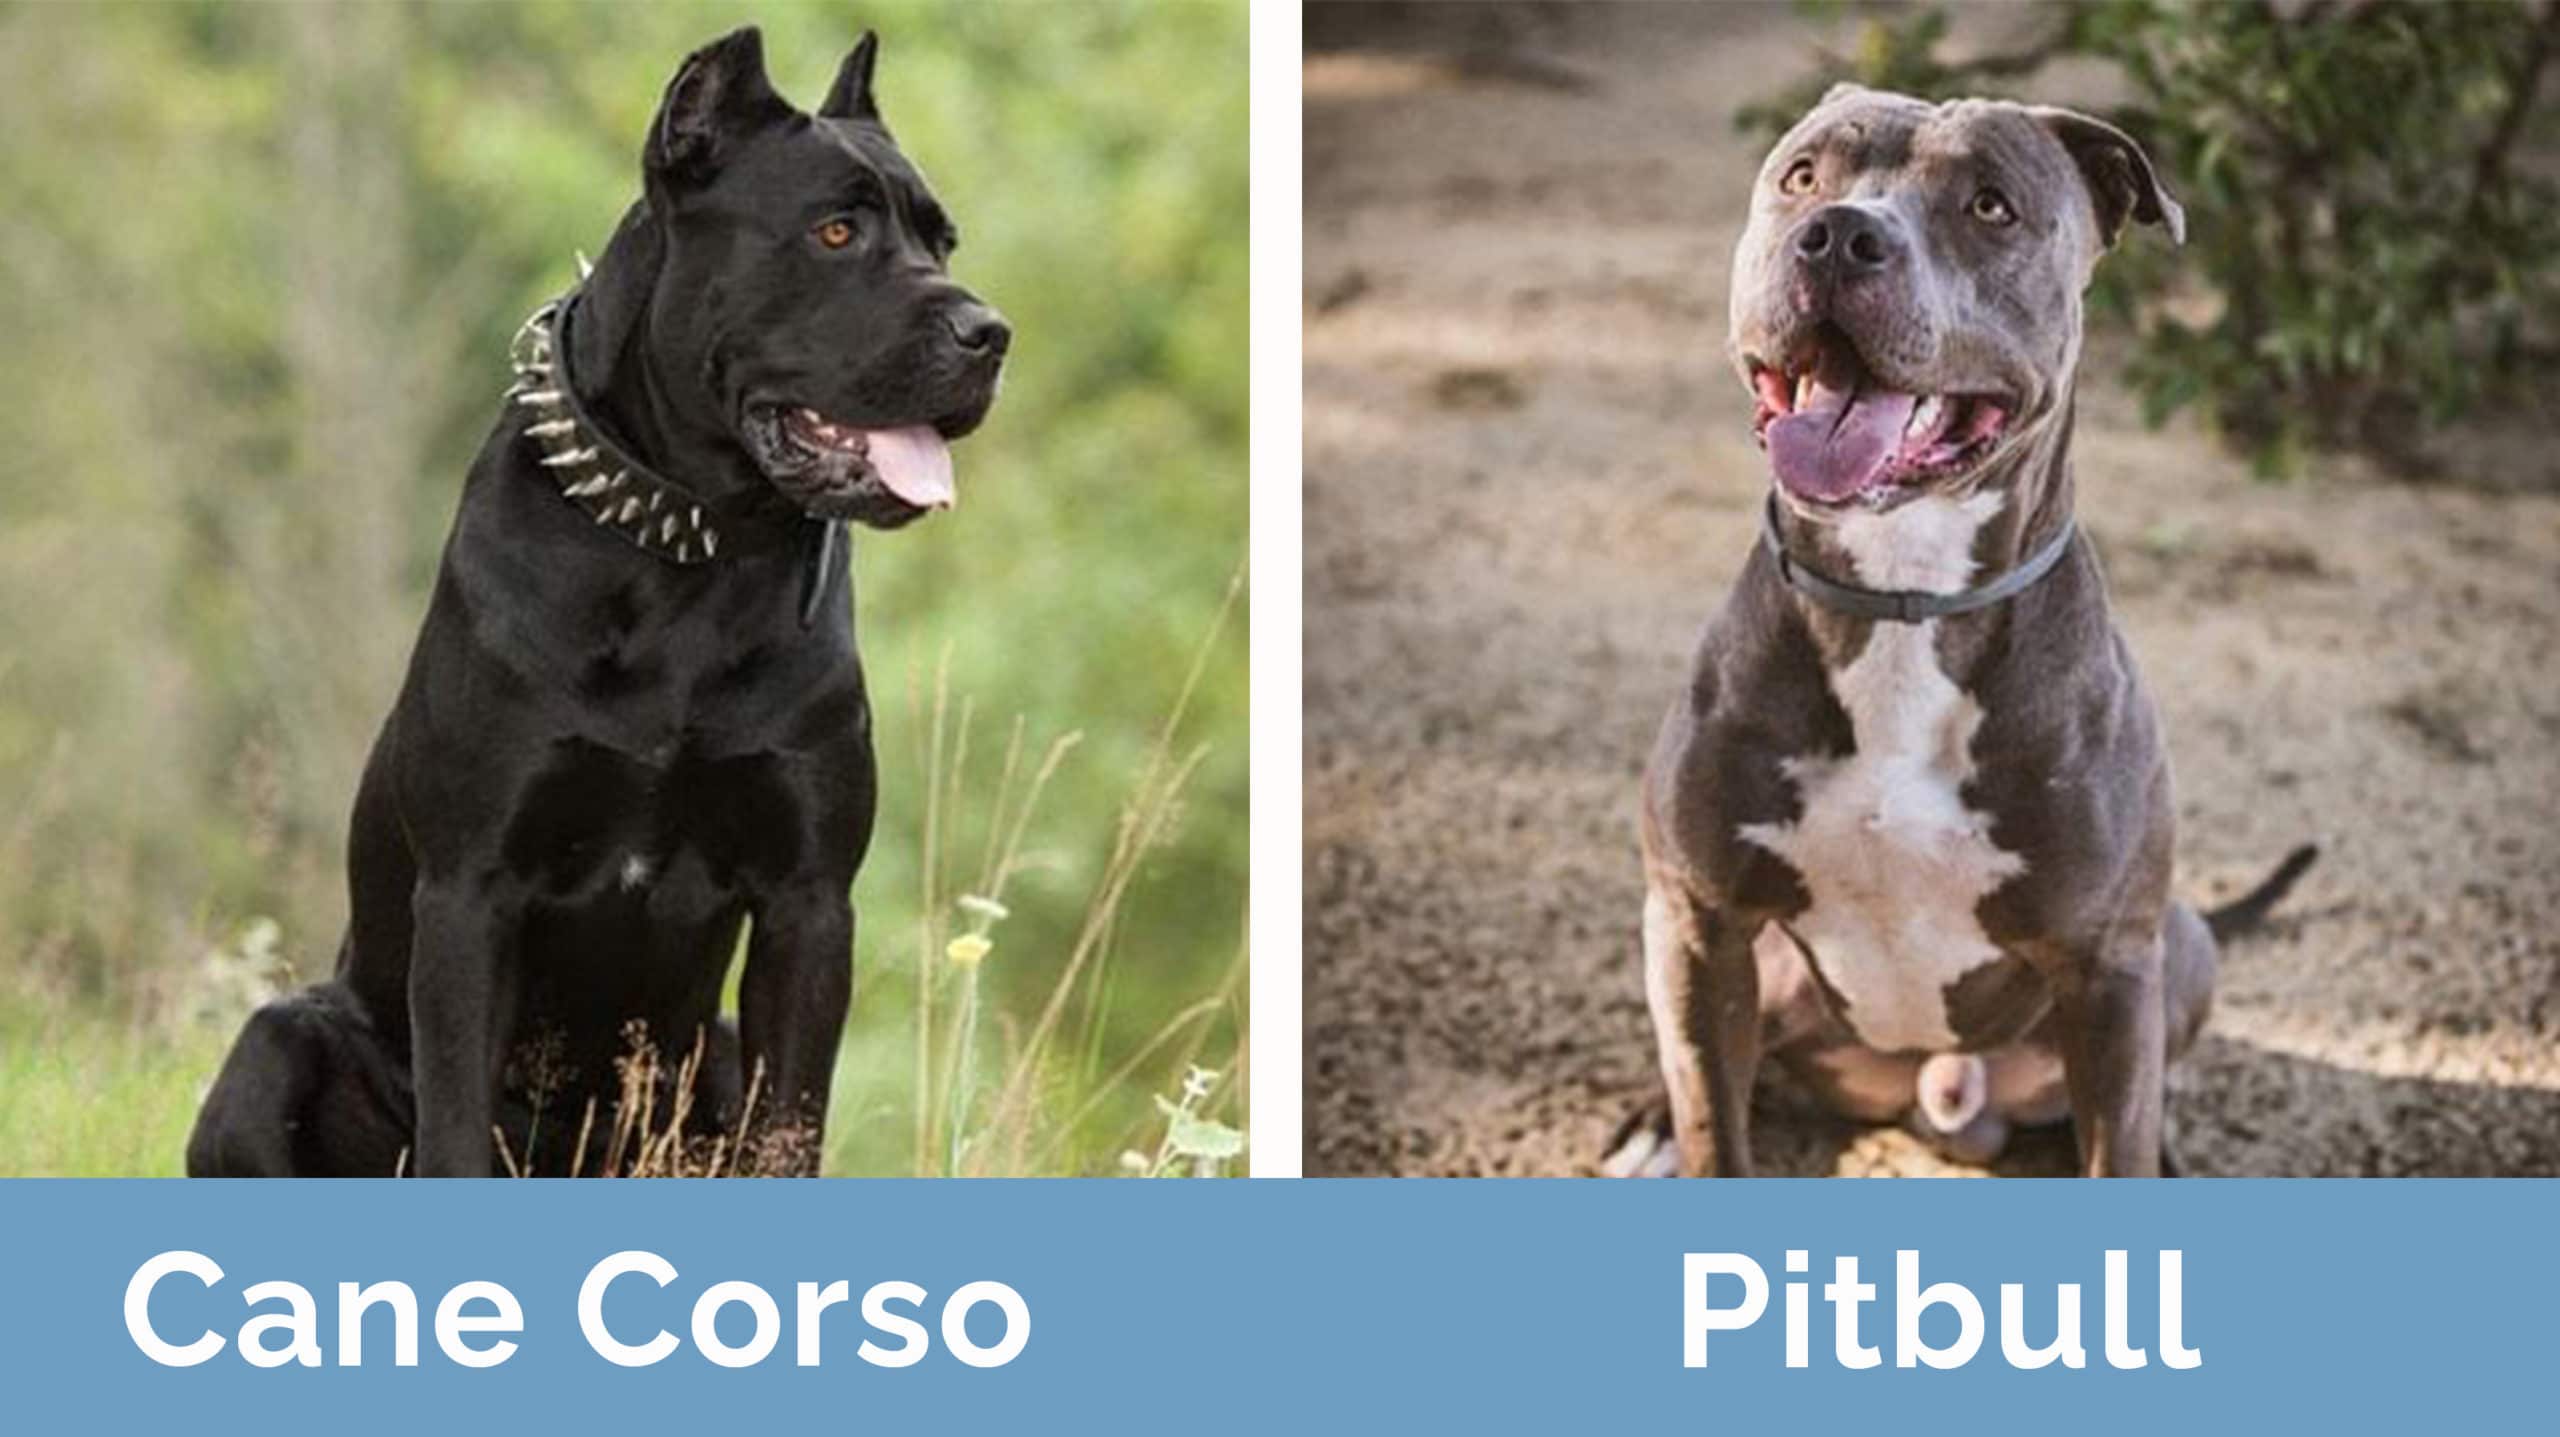 Cane Corso Pit Bull: are Differences? |